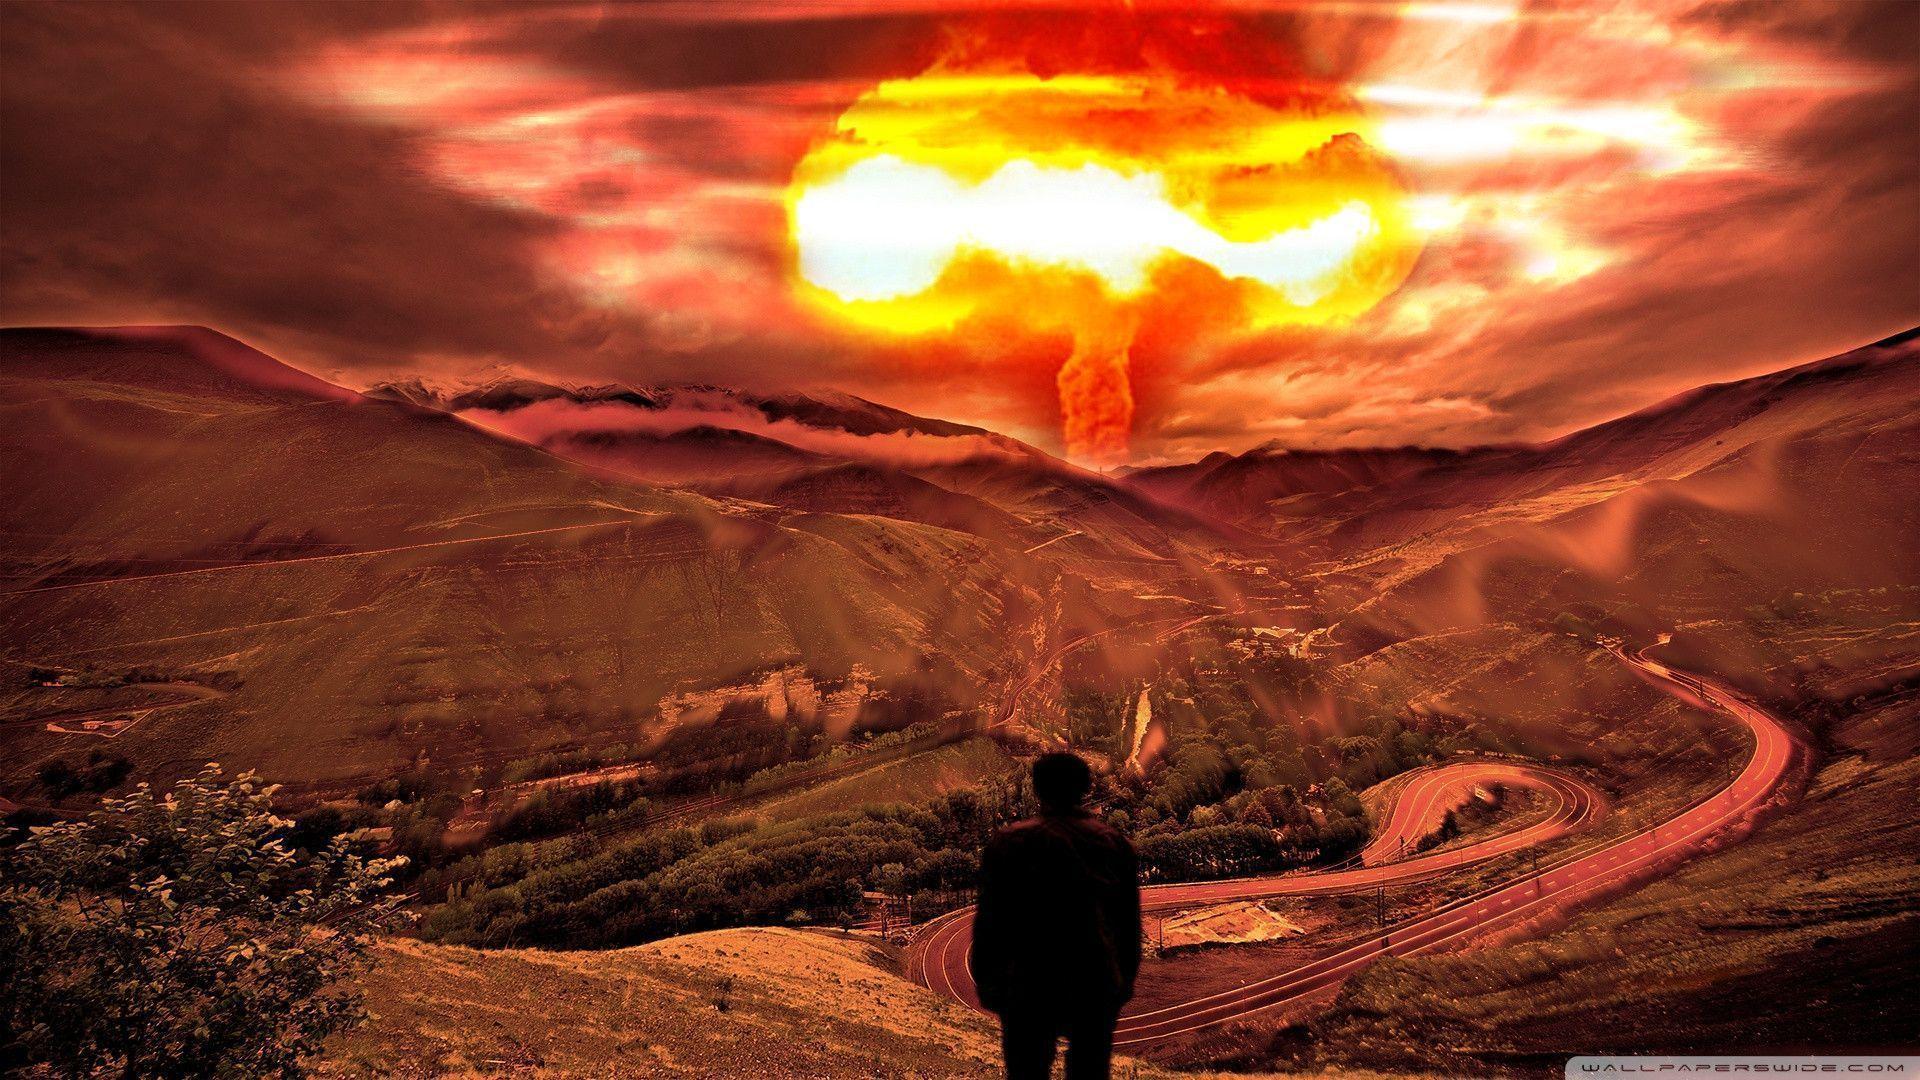 Wallpaper For > Nuclear Explosion Wallpaper 1920x1080